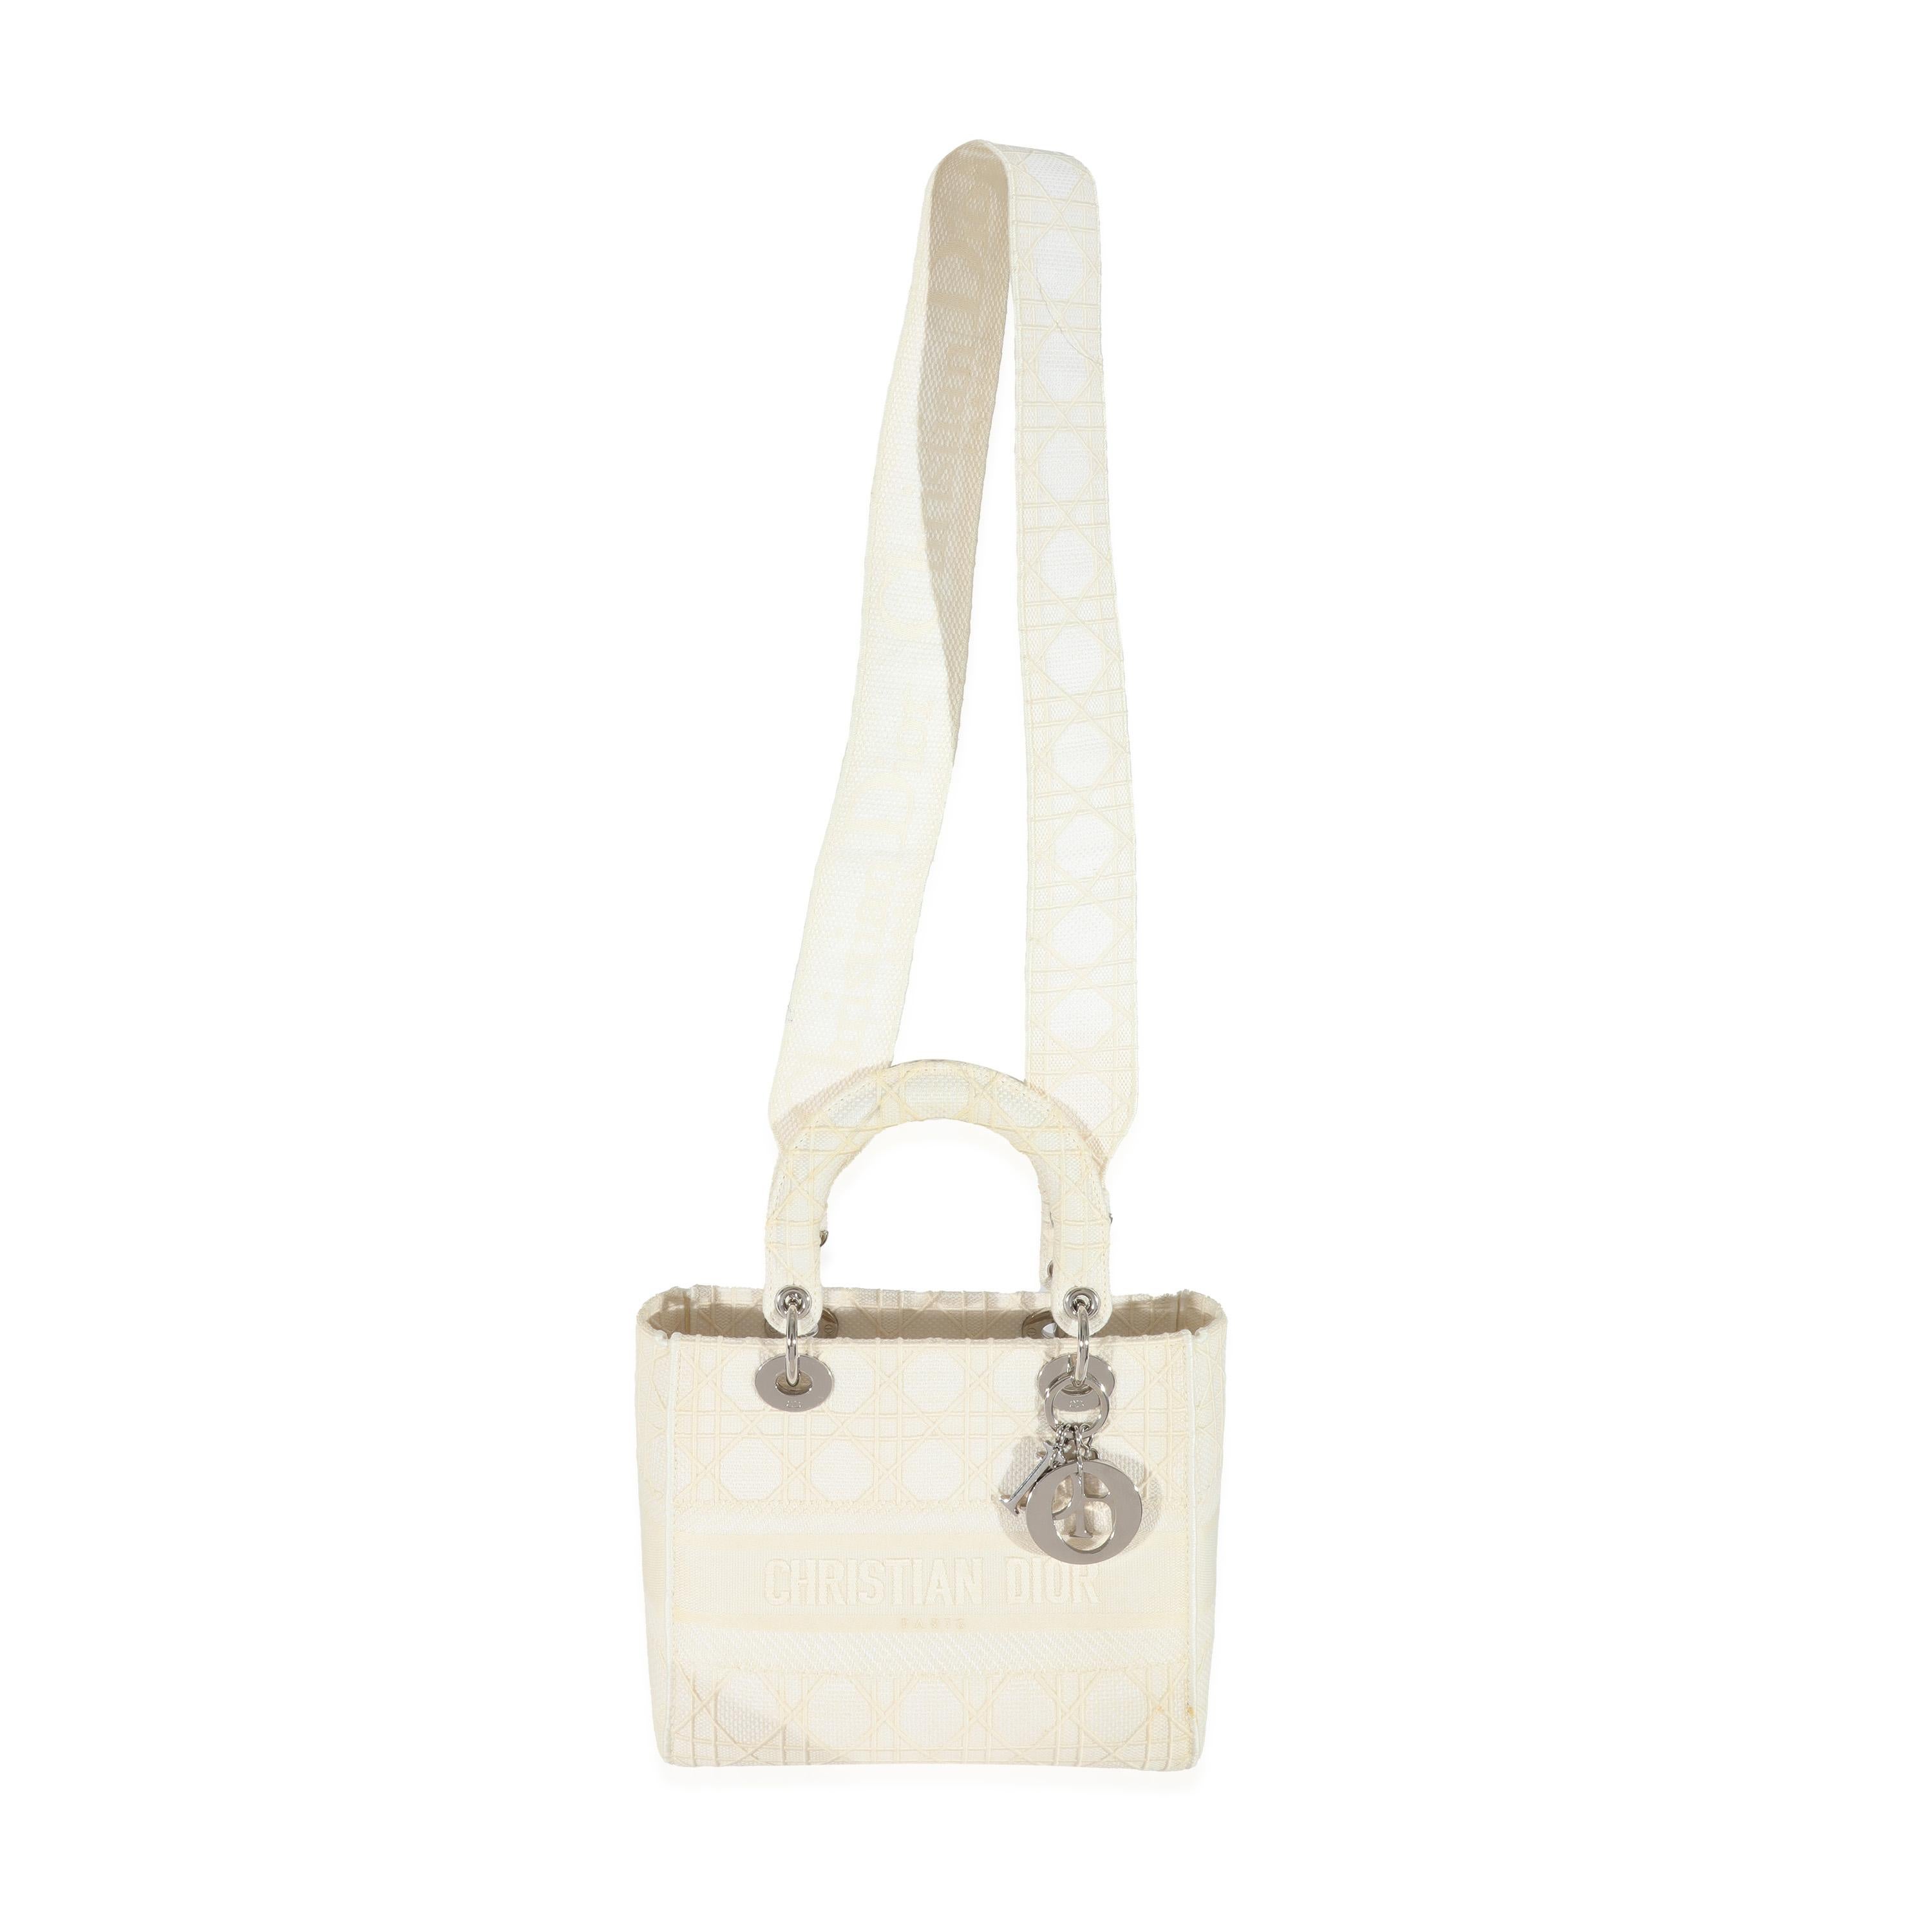 Listing Title: Christian Dior Cannage White Canvas D-Lite Lady Dior
SKU: 129693
Condition: Pre-owned 
Handbag Condition: Very Good
Condition Comments: Very Good Condition. Marks and discoloration to exterior. Scratching to hardware. Marks to